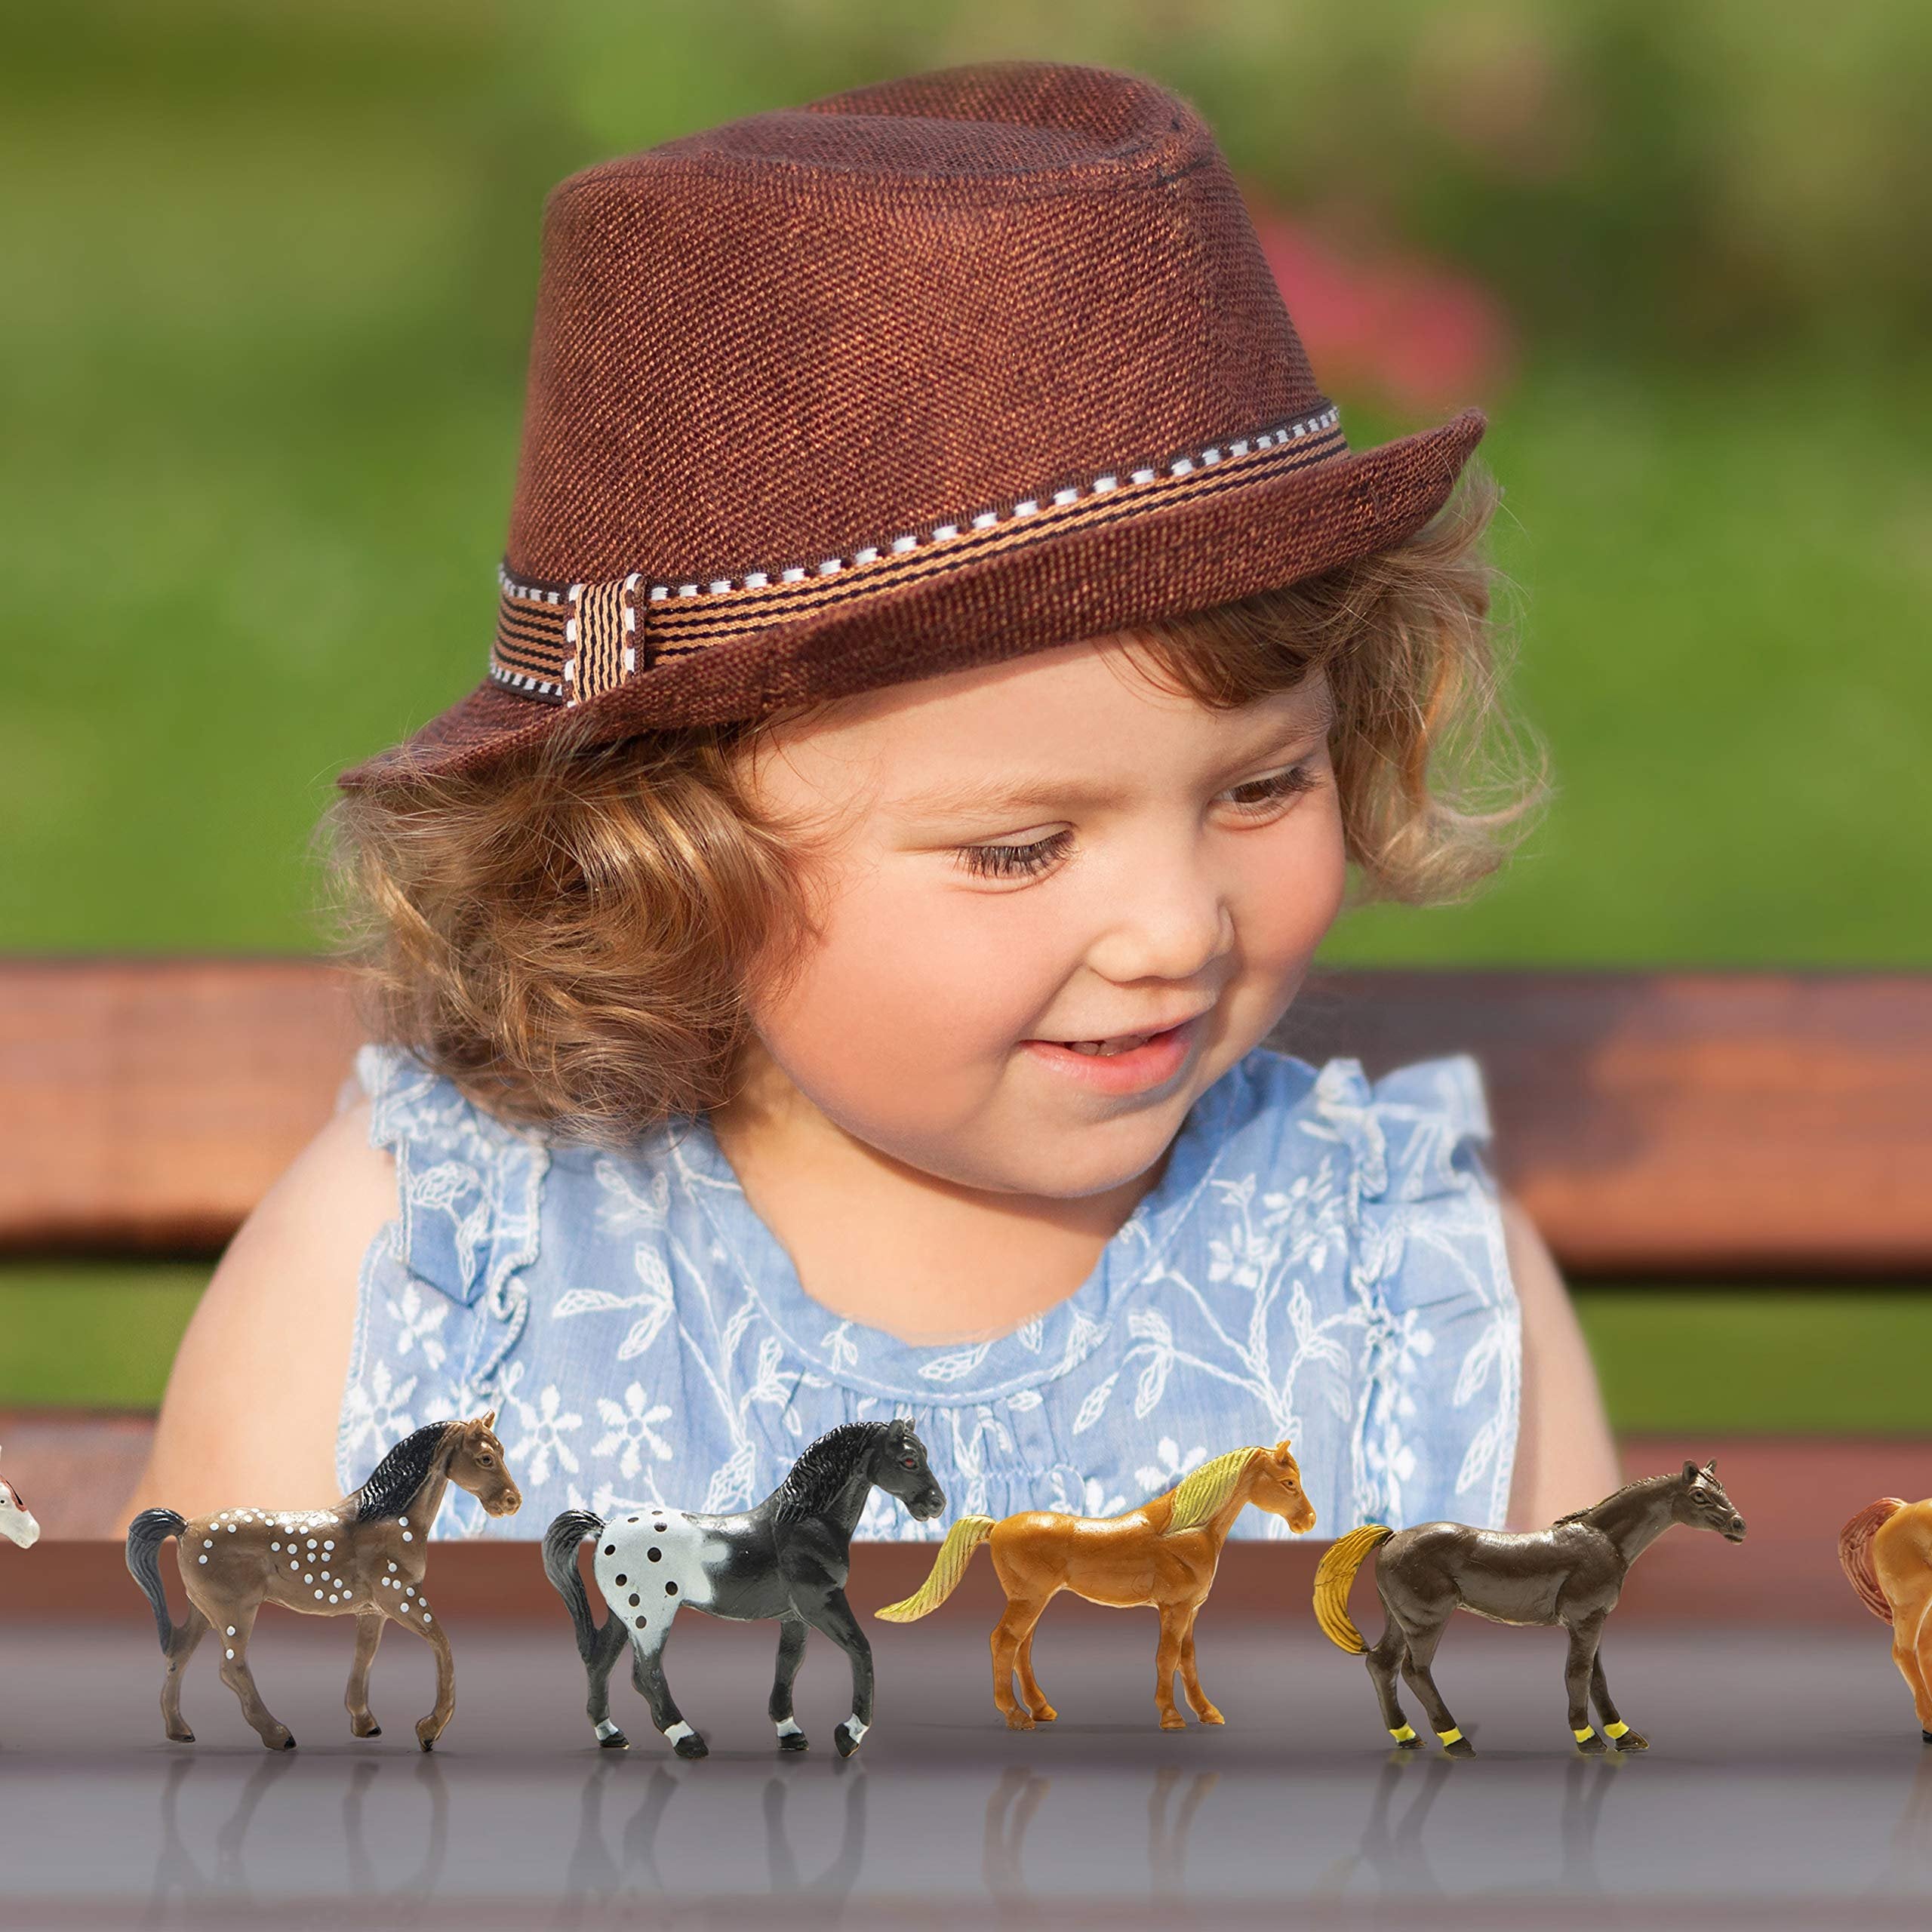 PREXTEX Plastic Horses Party Favors, 16 Count (All Different Horses in Various Poses and Colors) Best Toy Gift for Boys